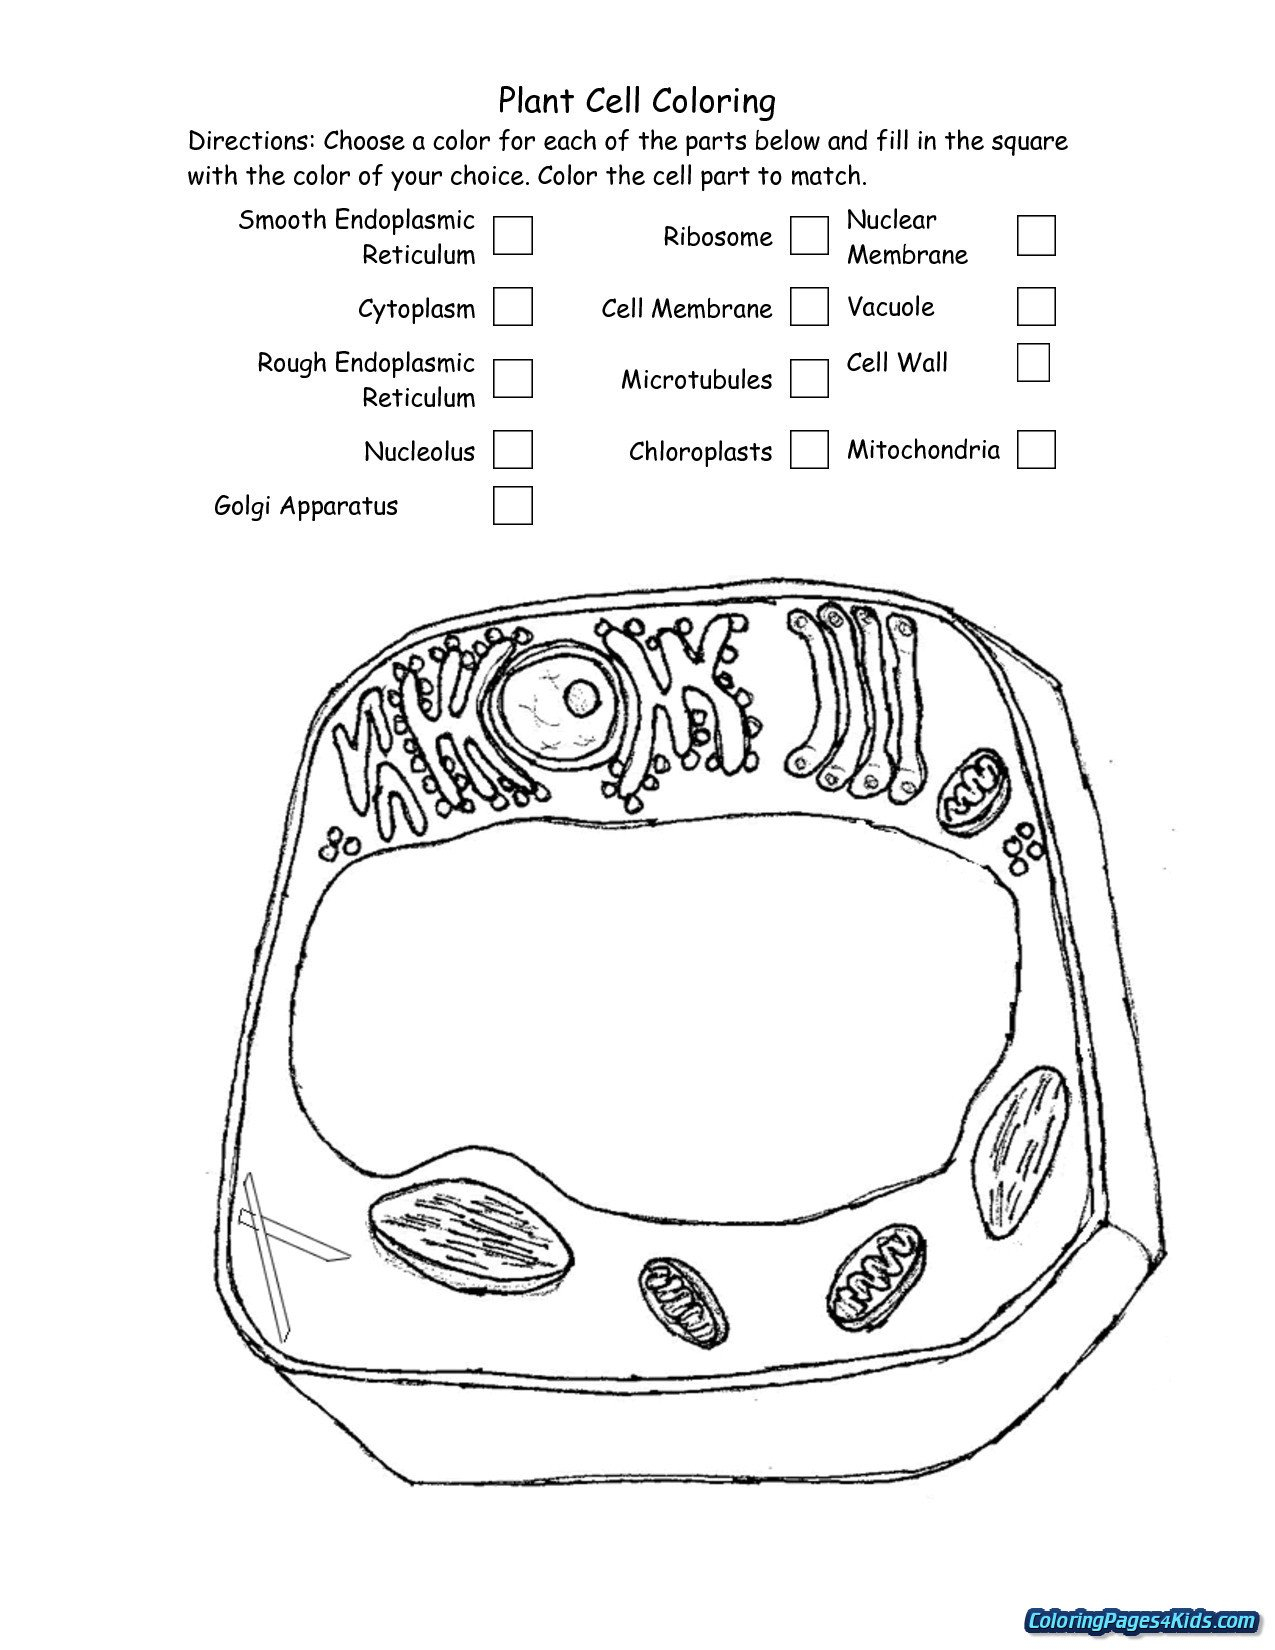 Cell Membrane Coloring Worksheet  Jvzooreview Together With Plant Cell Coloring Worksheet Key